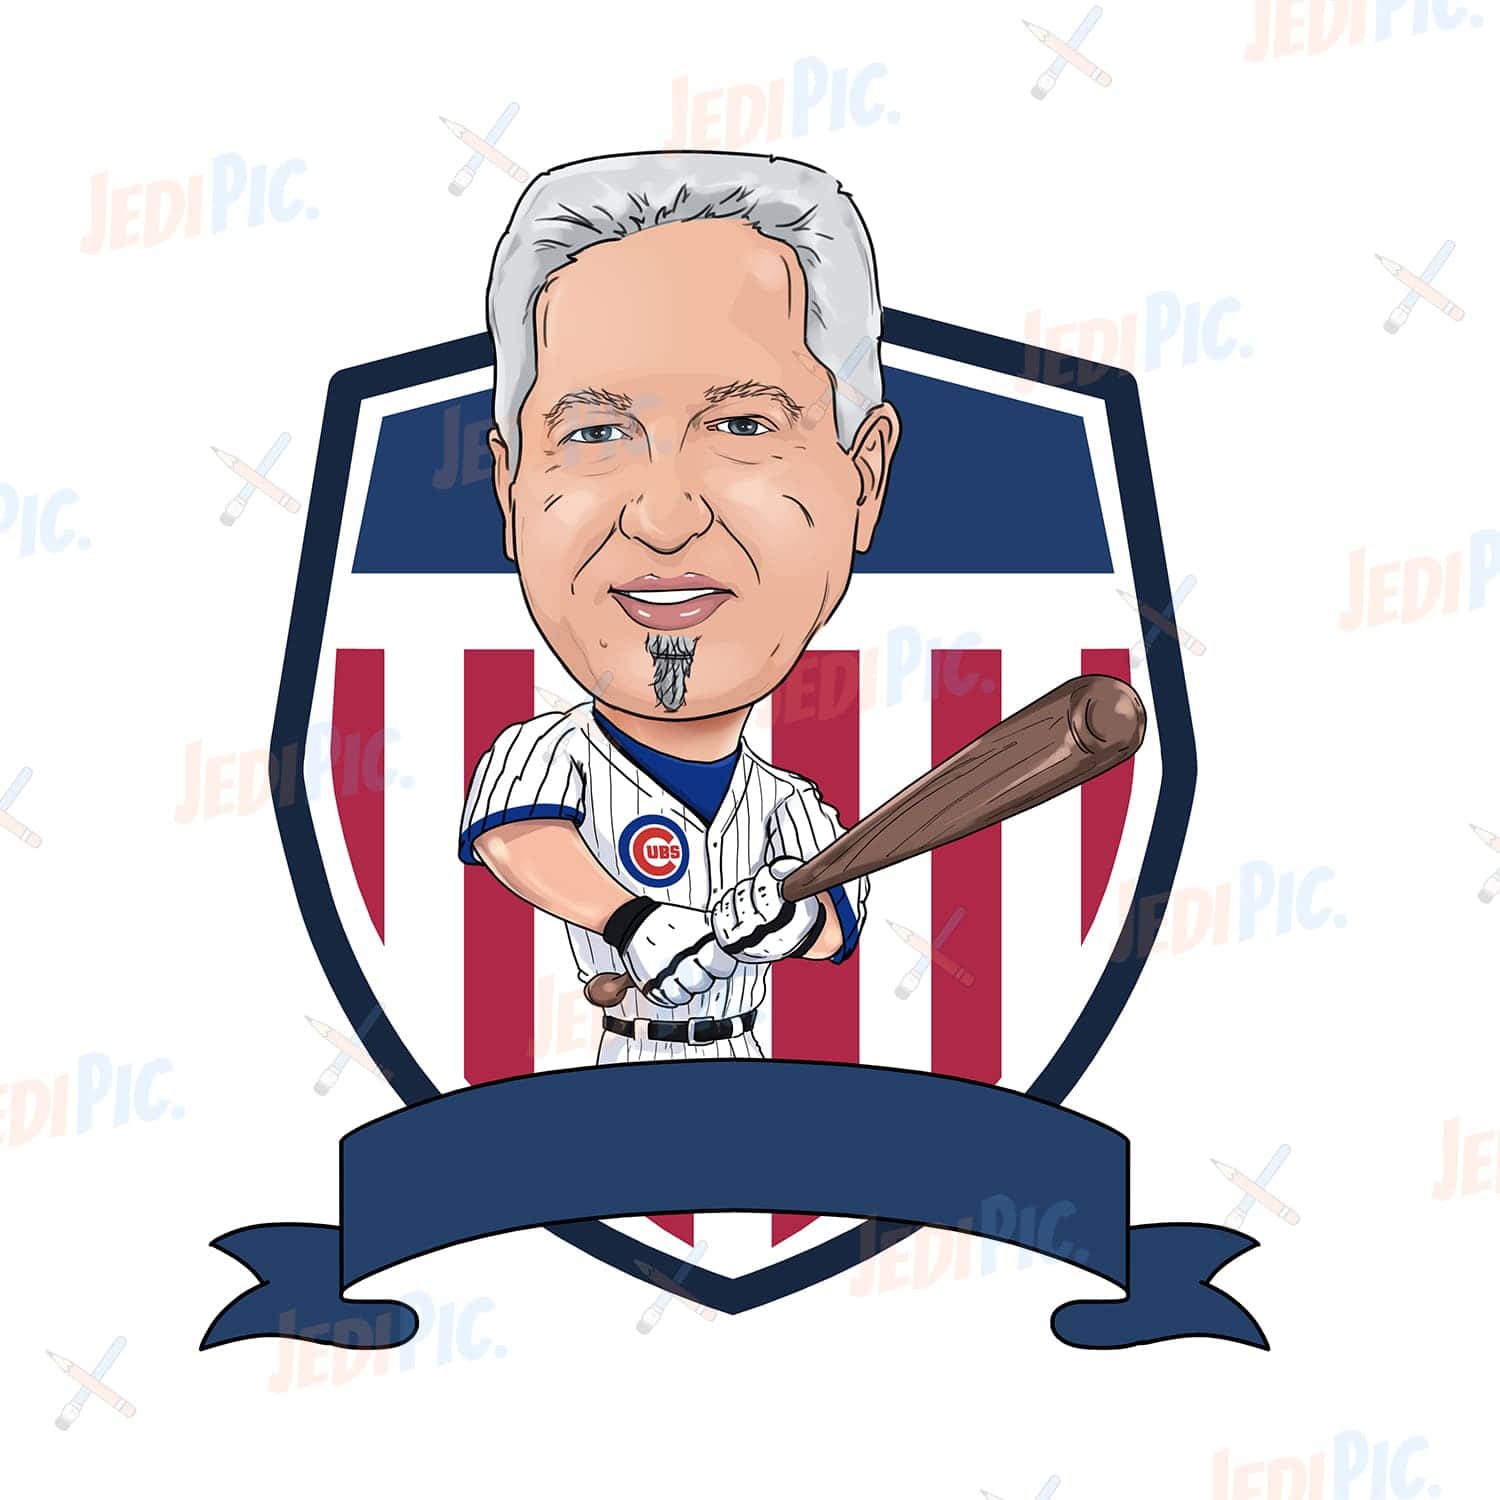 Baseball Caricature from Photos